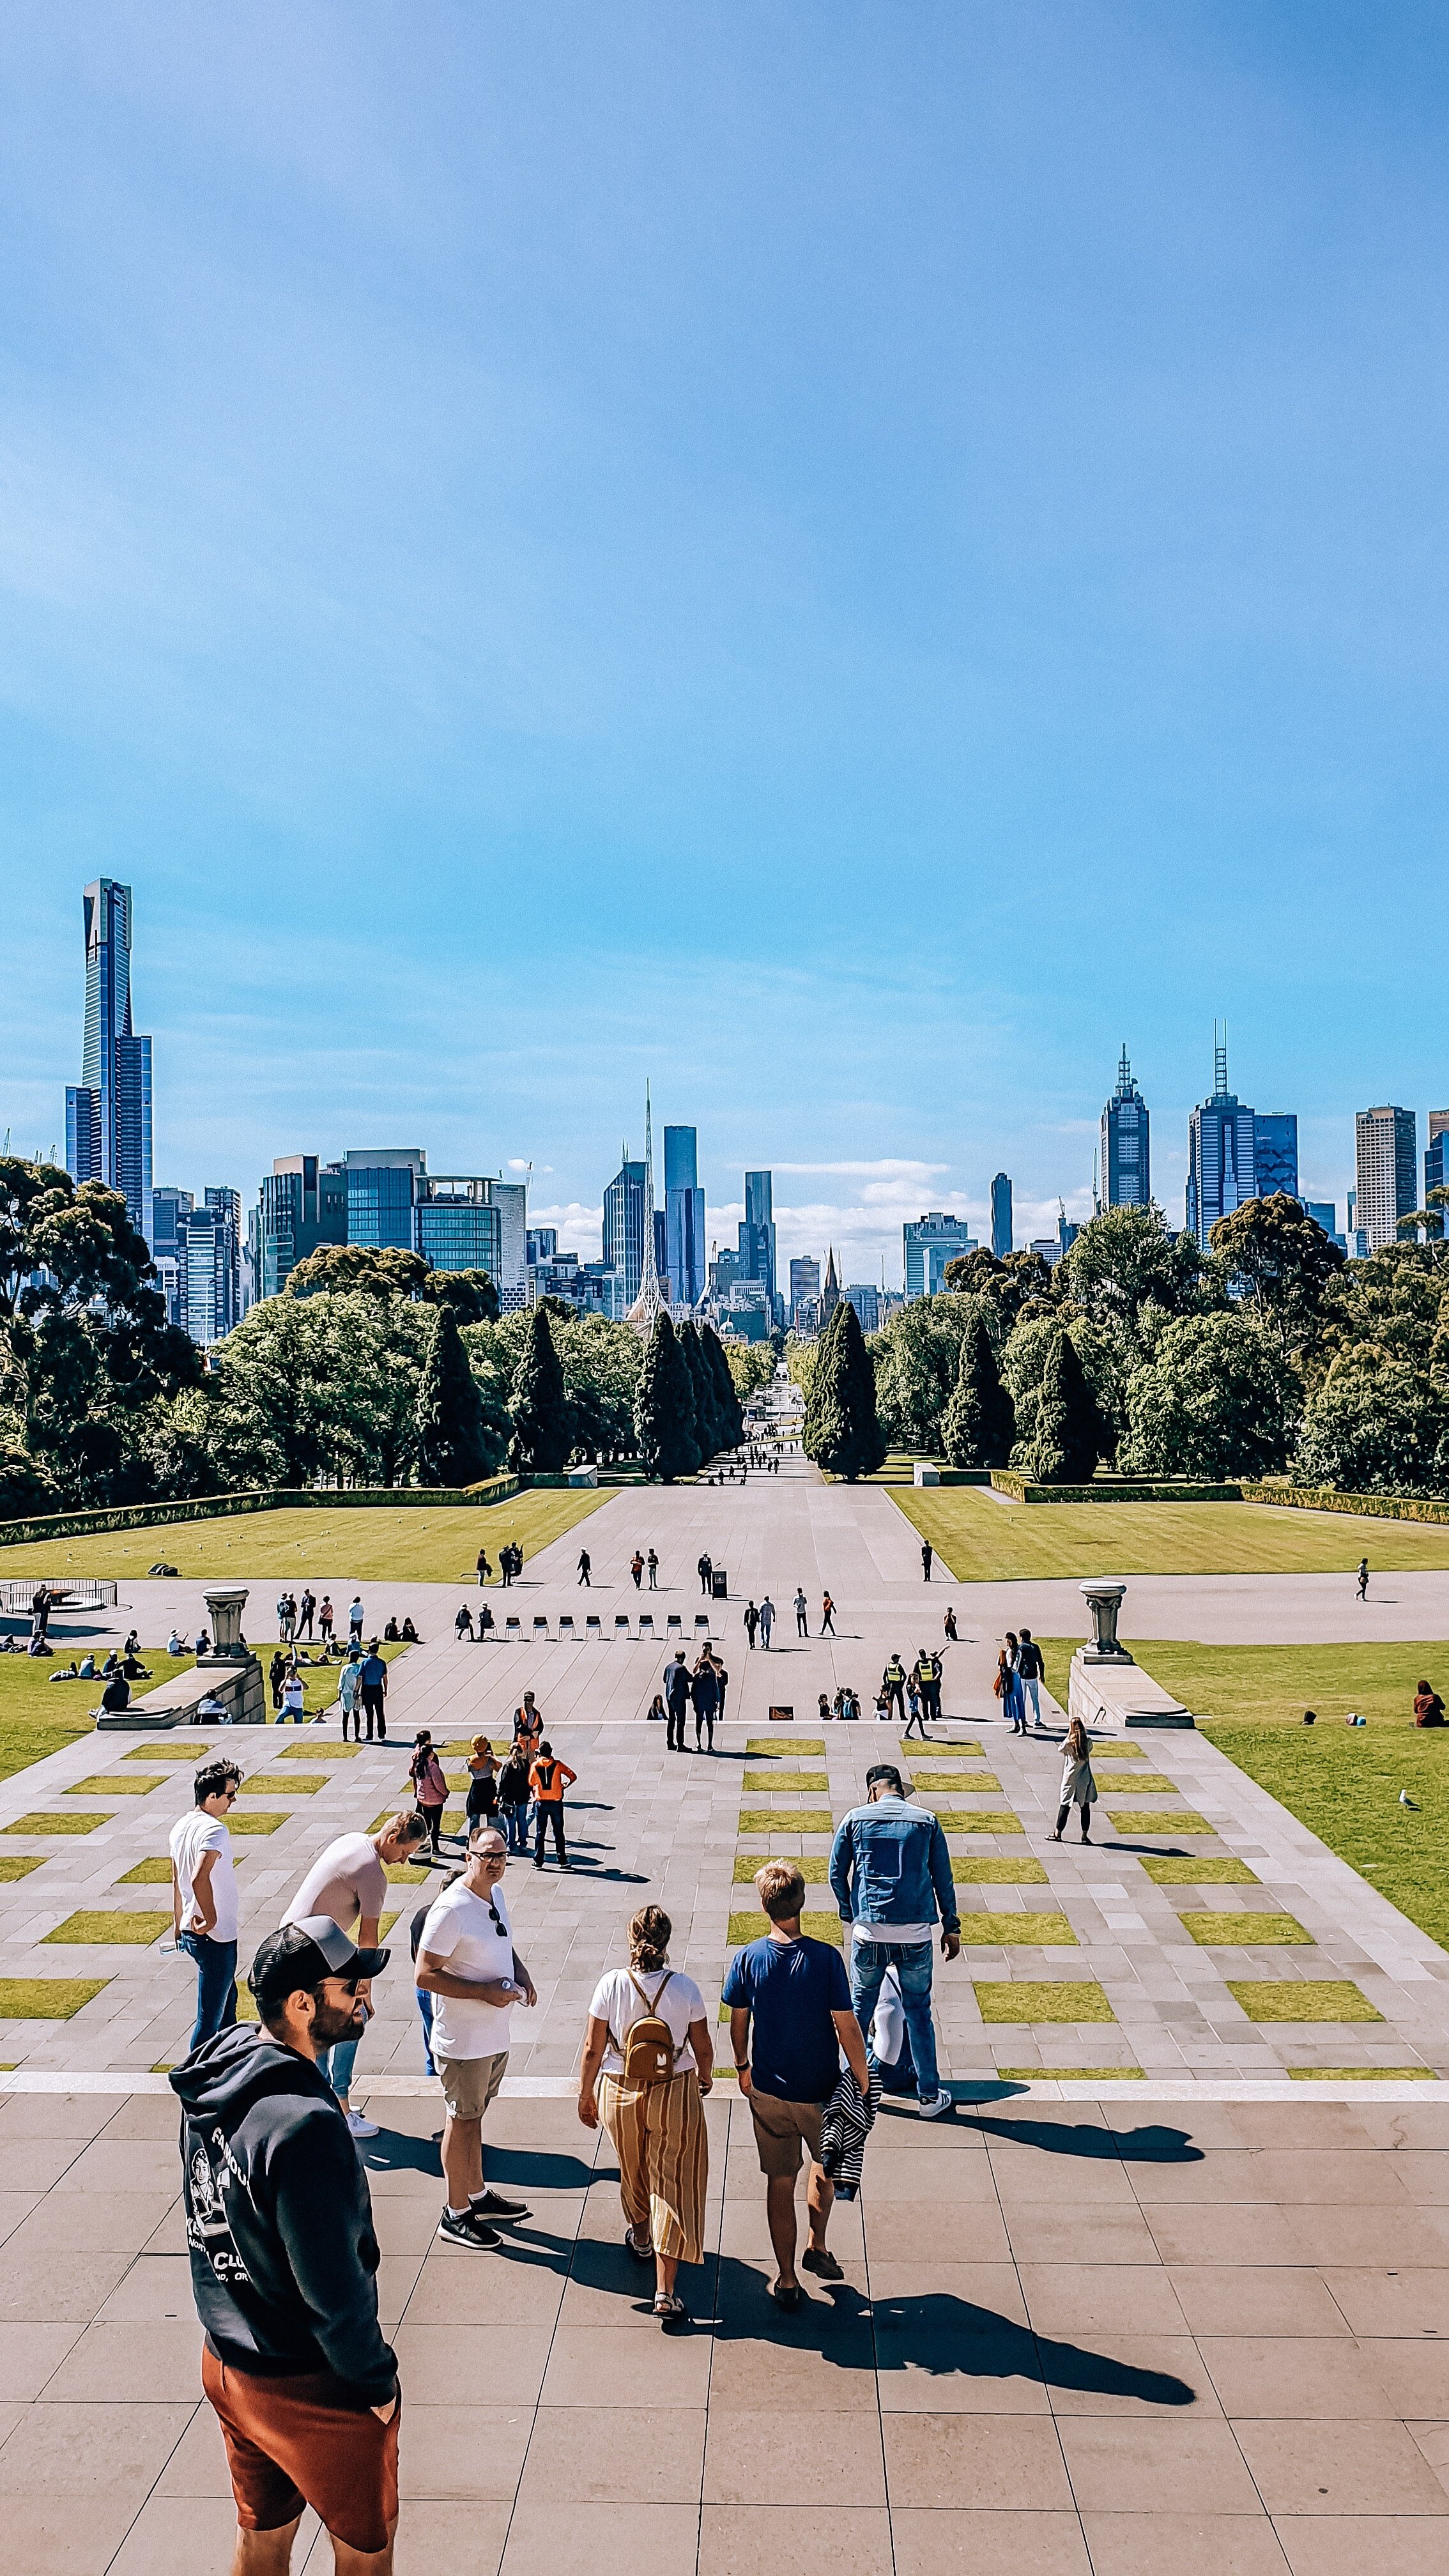 3 Days in Melbourne itinerary | Helena Bradbury Travel Blog | Melbourne Itinerary 3 days | How to spend 3 days in Melbourne | Melbourne Australia Travel Guide | Melbourne Australia travel things to do | Melbourne blog | Melbourne victoria | Things t…